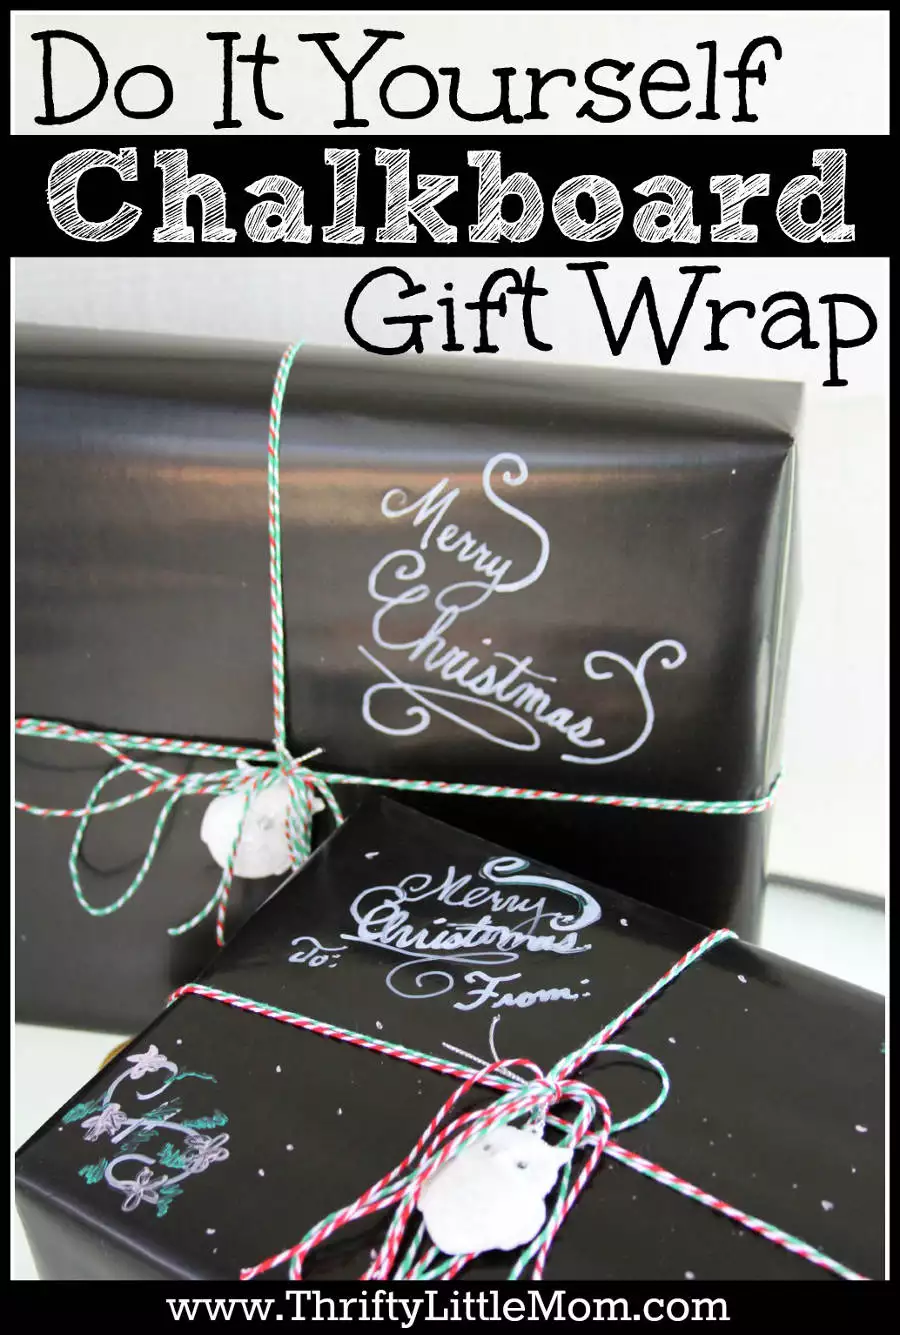 Chalkboard Gift Wrap Tutorial. Step by step instructions for making this really fun, out of the box gift wrap for any event or season. Just change the message on the box.